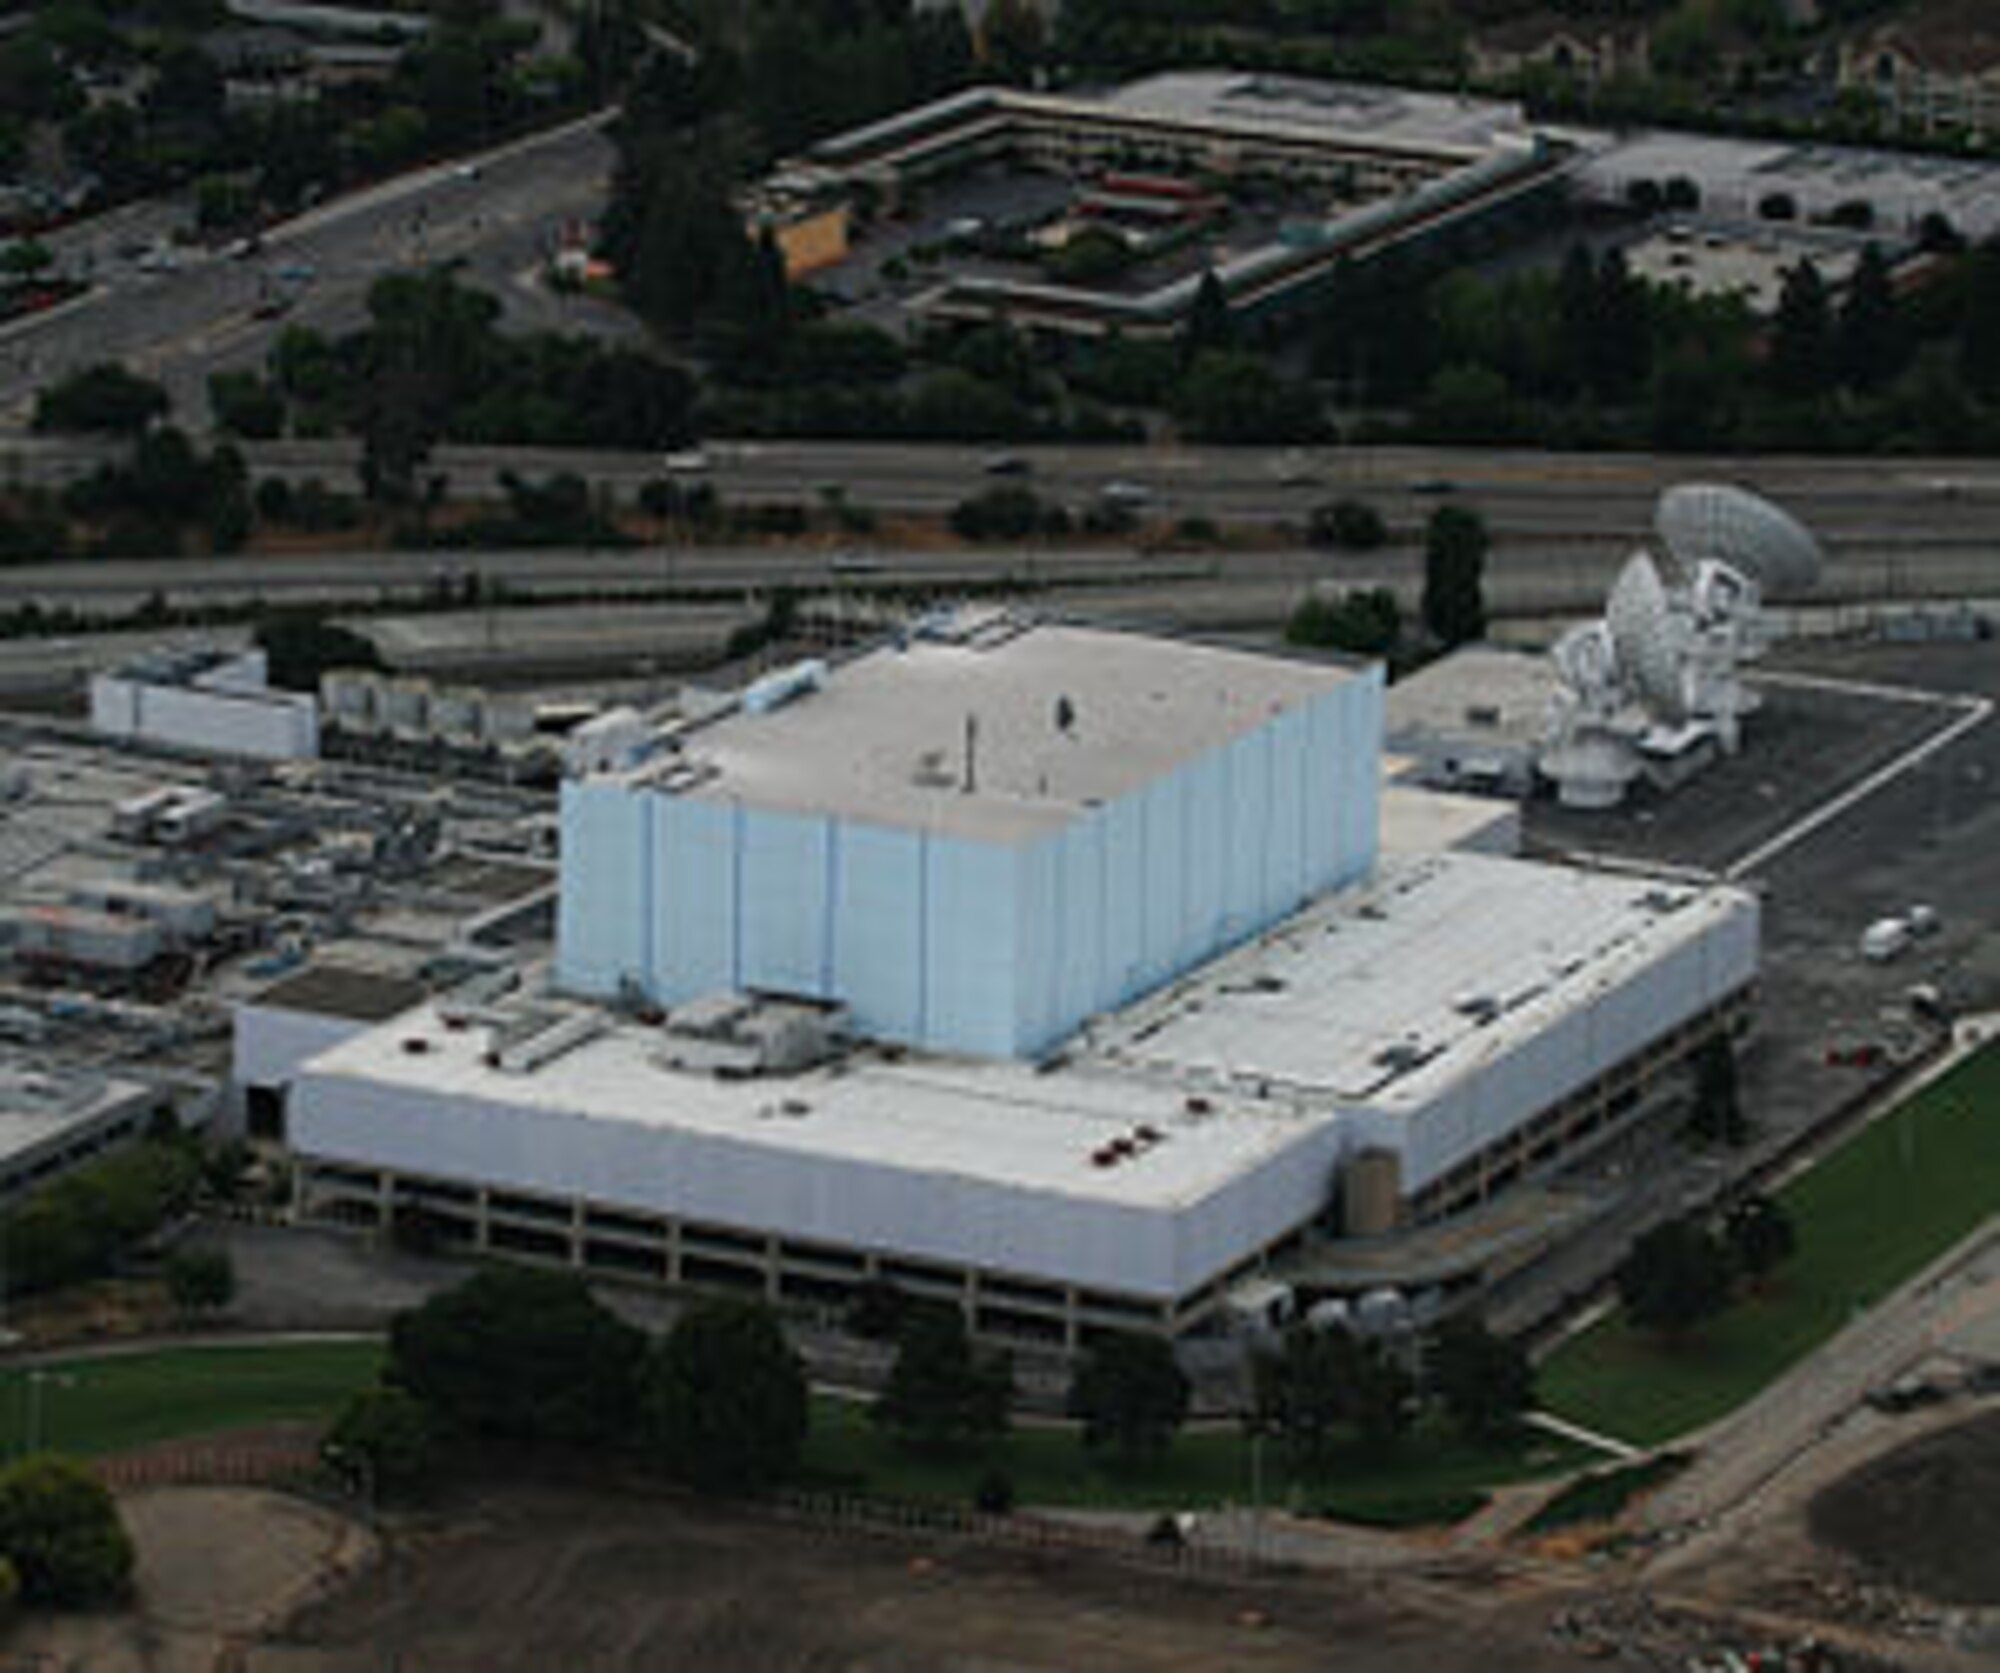 SUNNYVALE, Calif. - The Blue Cube building at Onizuka Air Force Station played a critical role in our nation's defense since the 1960s.